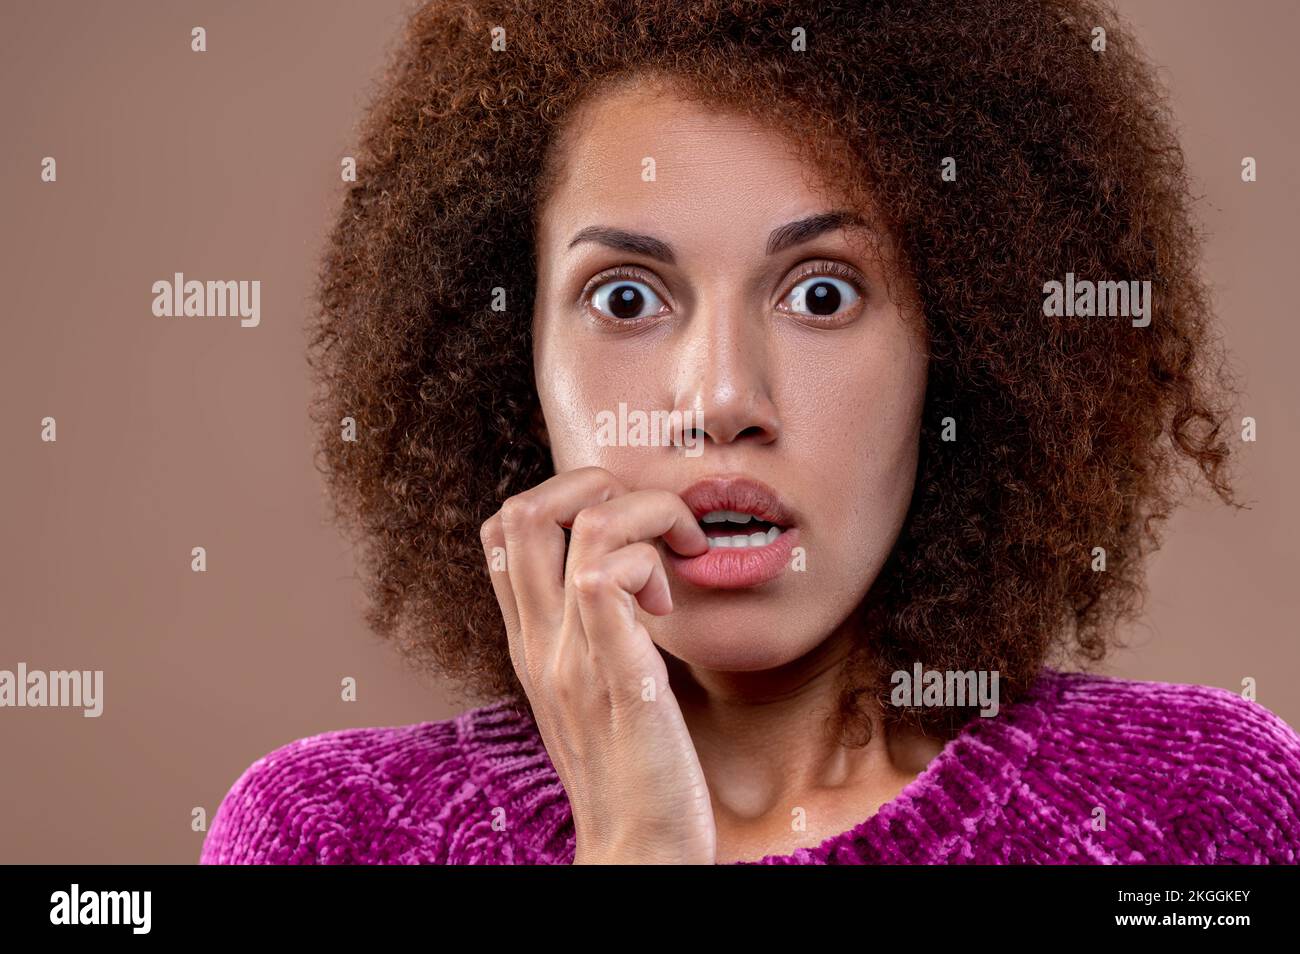 Dark-haired young woman looking frightened Stock Photo